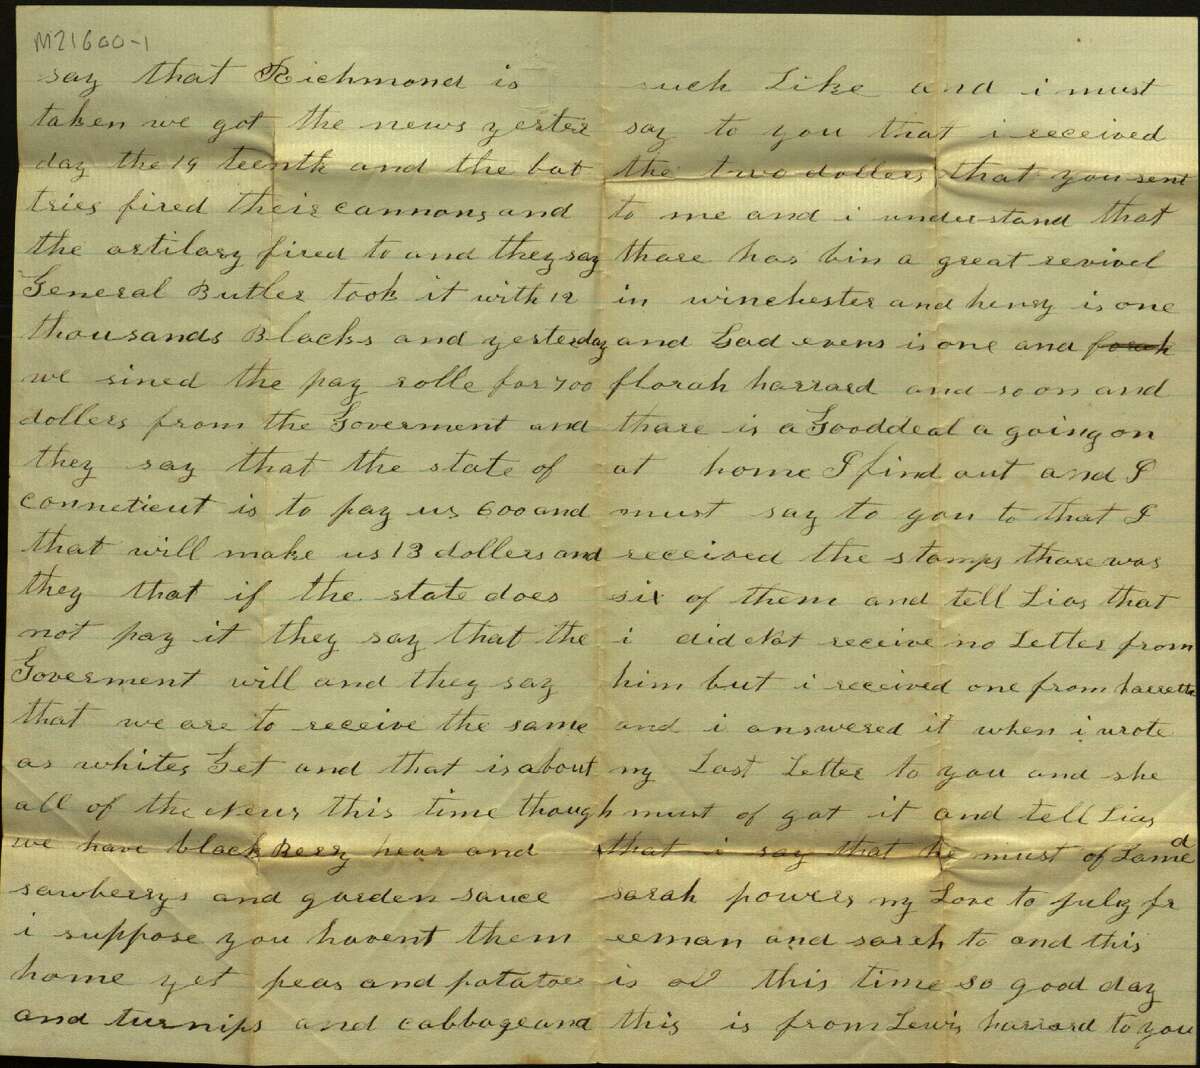 Civil War soldier and Winchester resident Lewis Hazzard wrote this letter to his mother, Louisa, during his service to the Union Army in 1864.